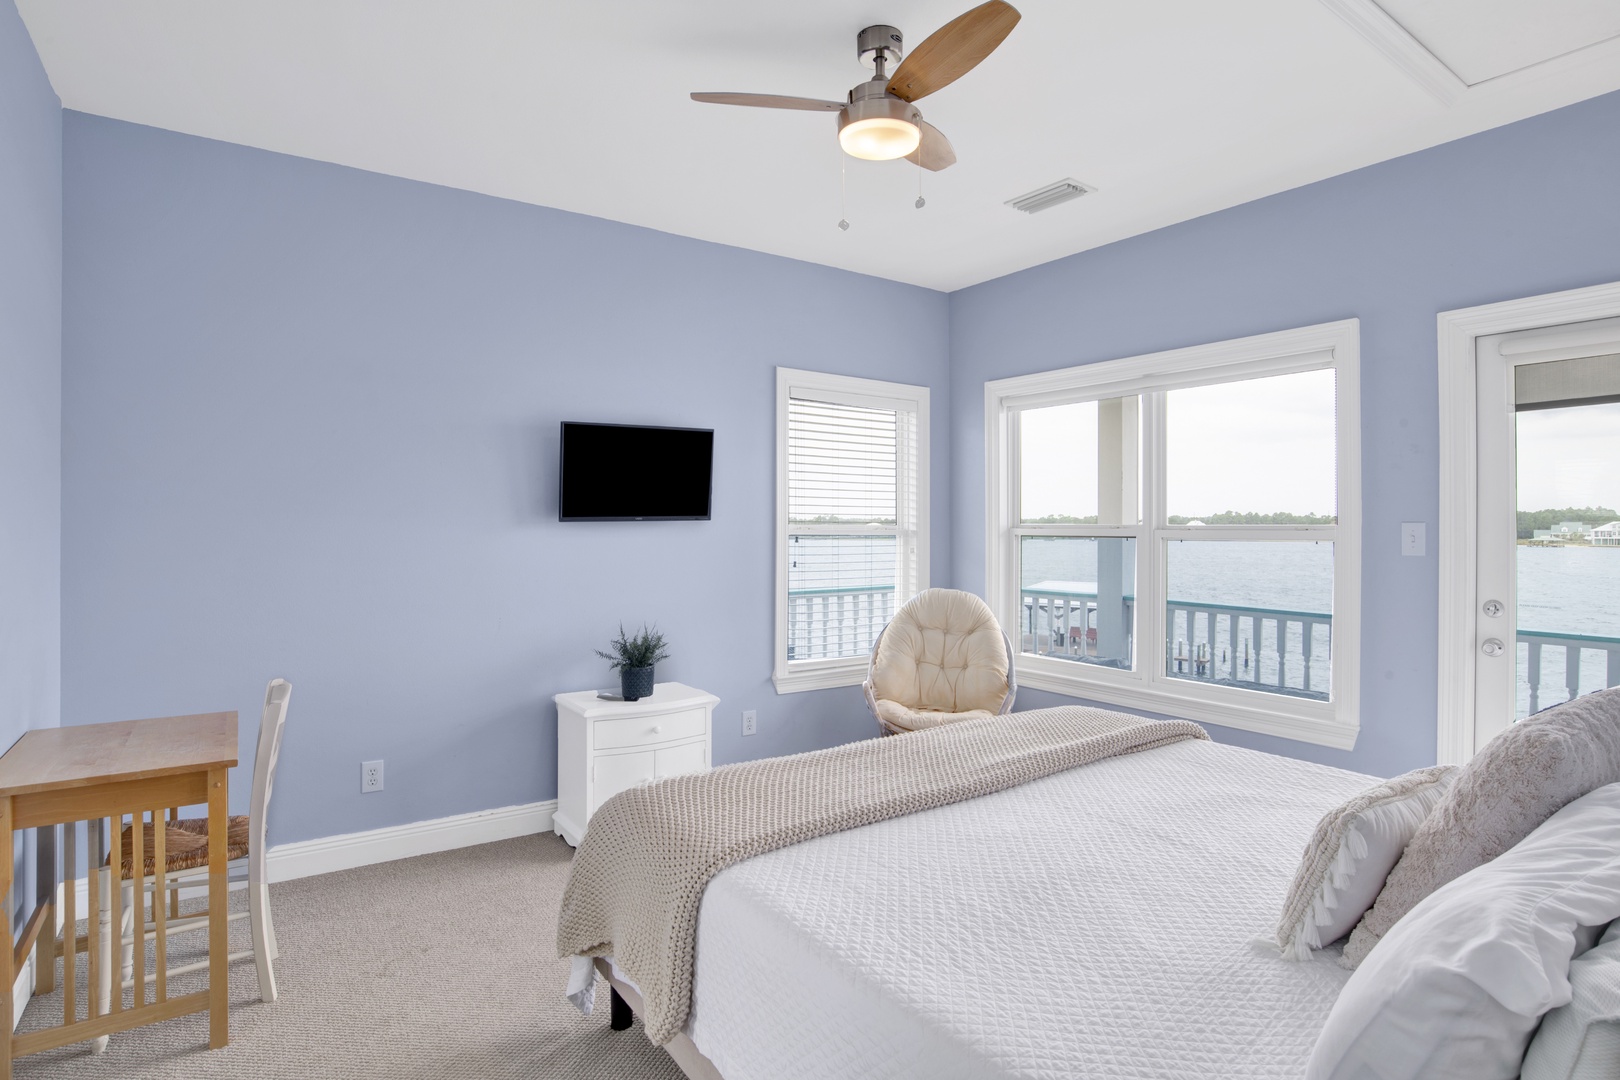 Bedroom 2 features a TV, ceiling fan, water views and a private bathroom